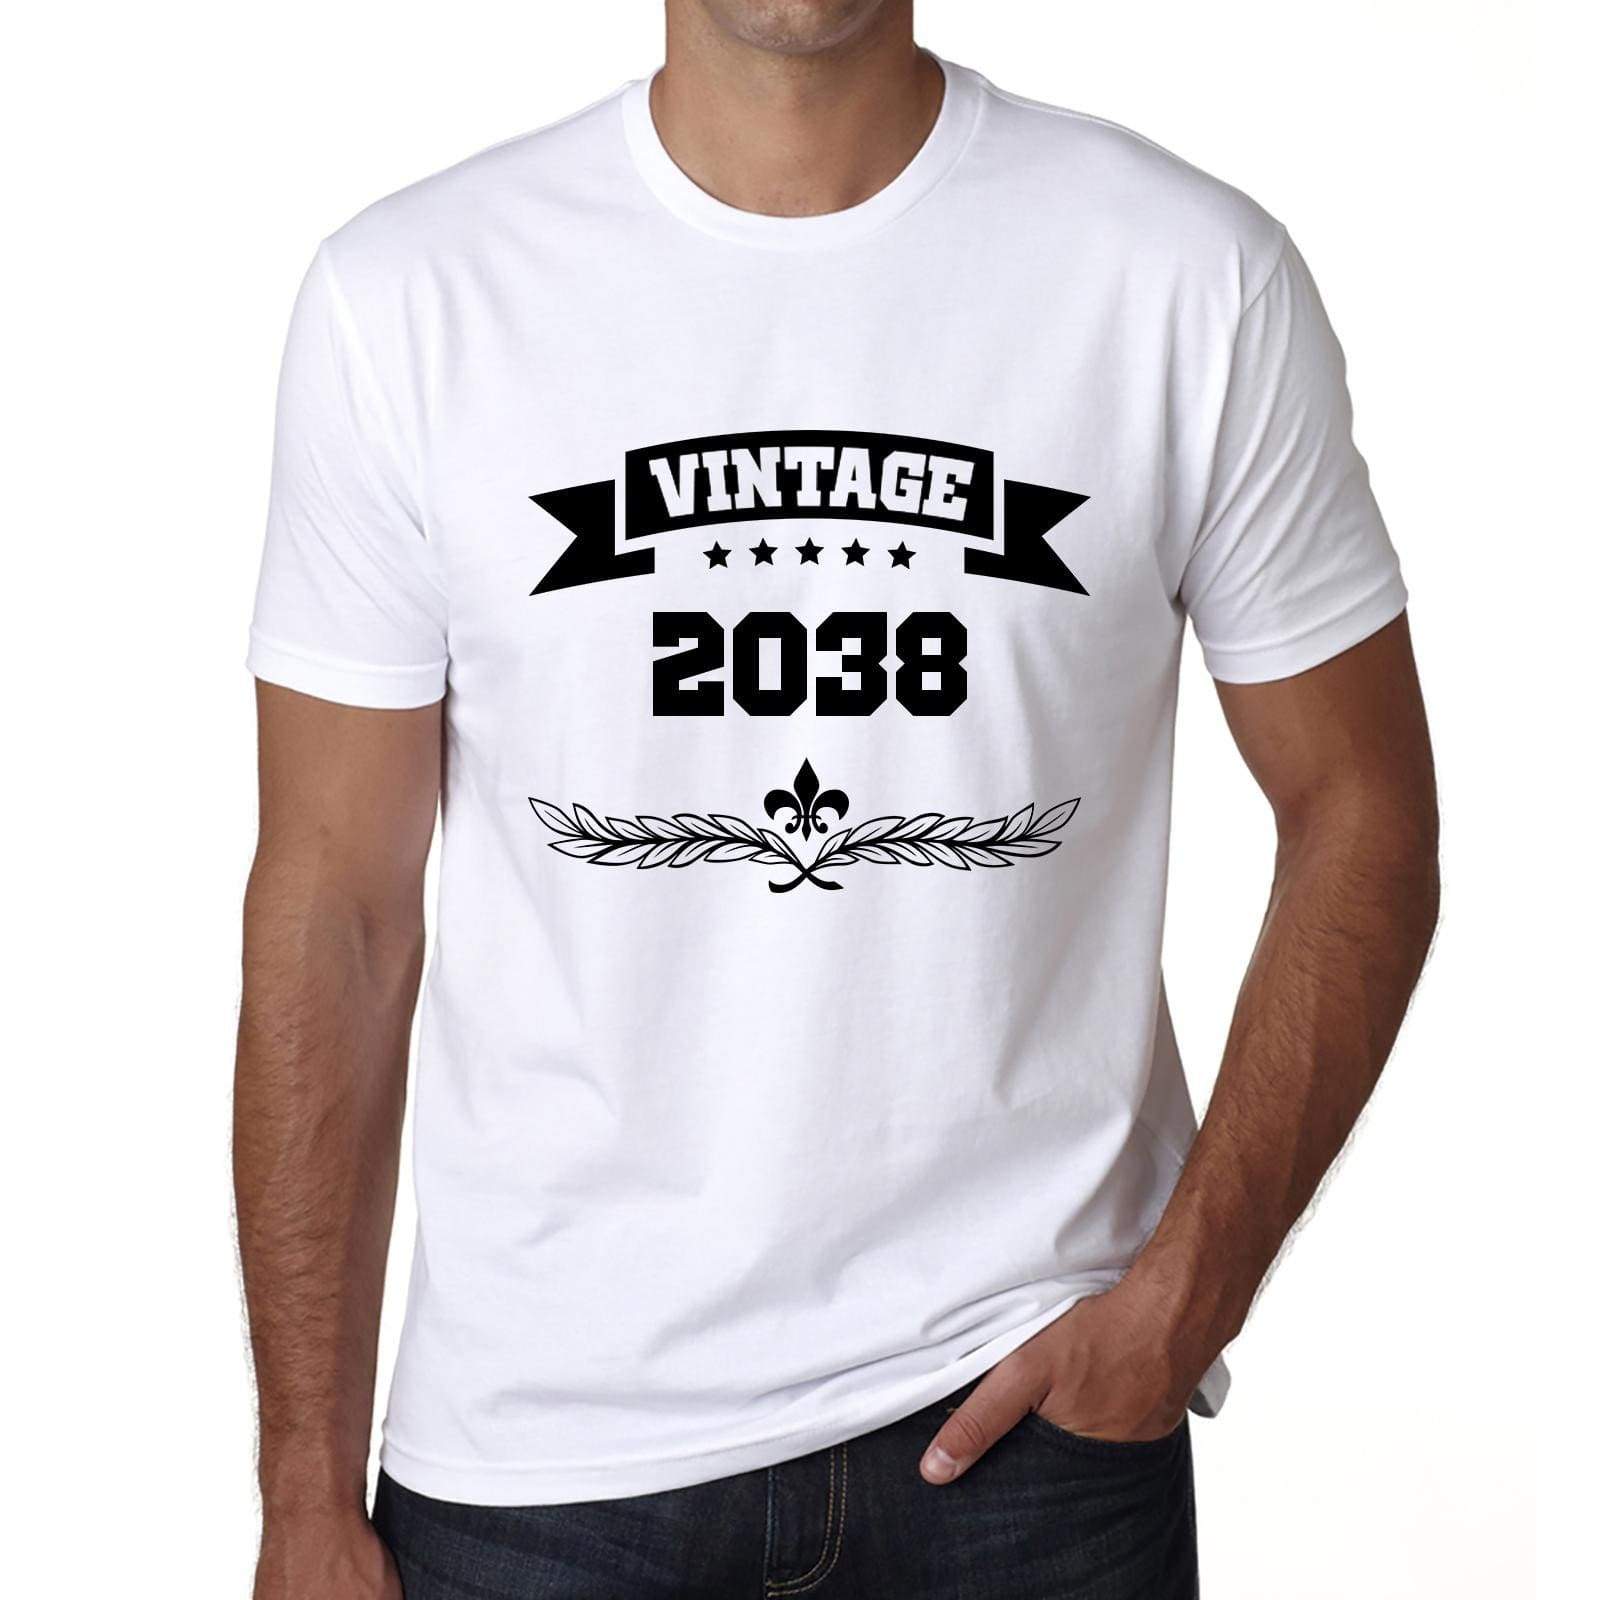 2038 Vintage Year White Mens Short Sleeve Round Neck T-Shirt 00096 - White / S - Casual